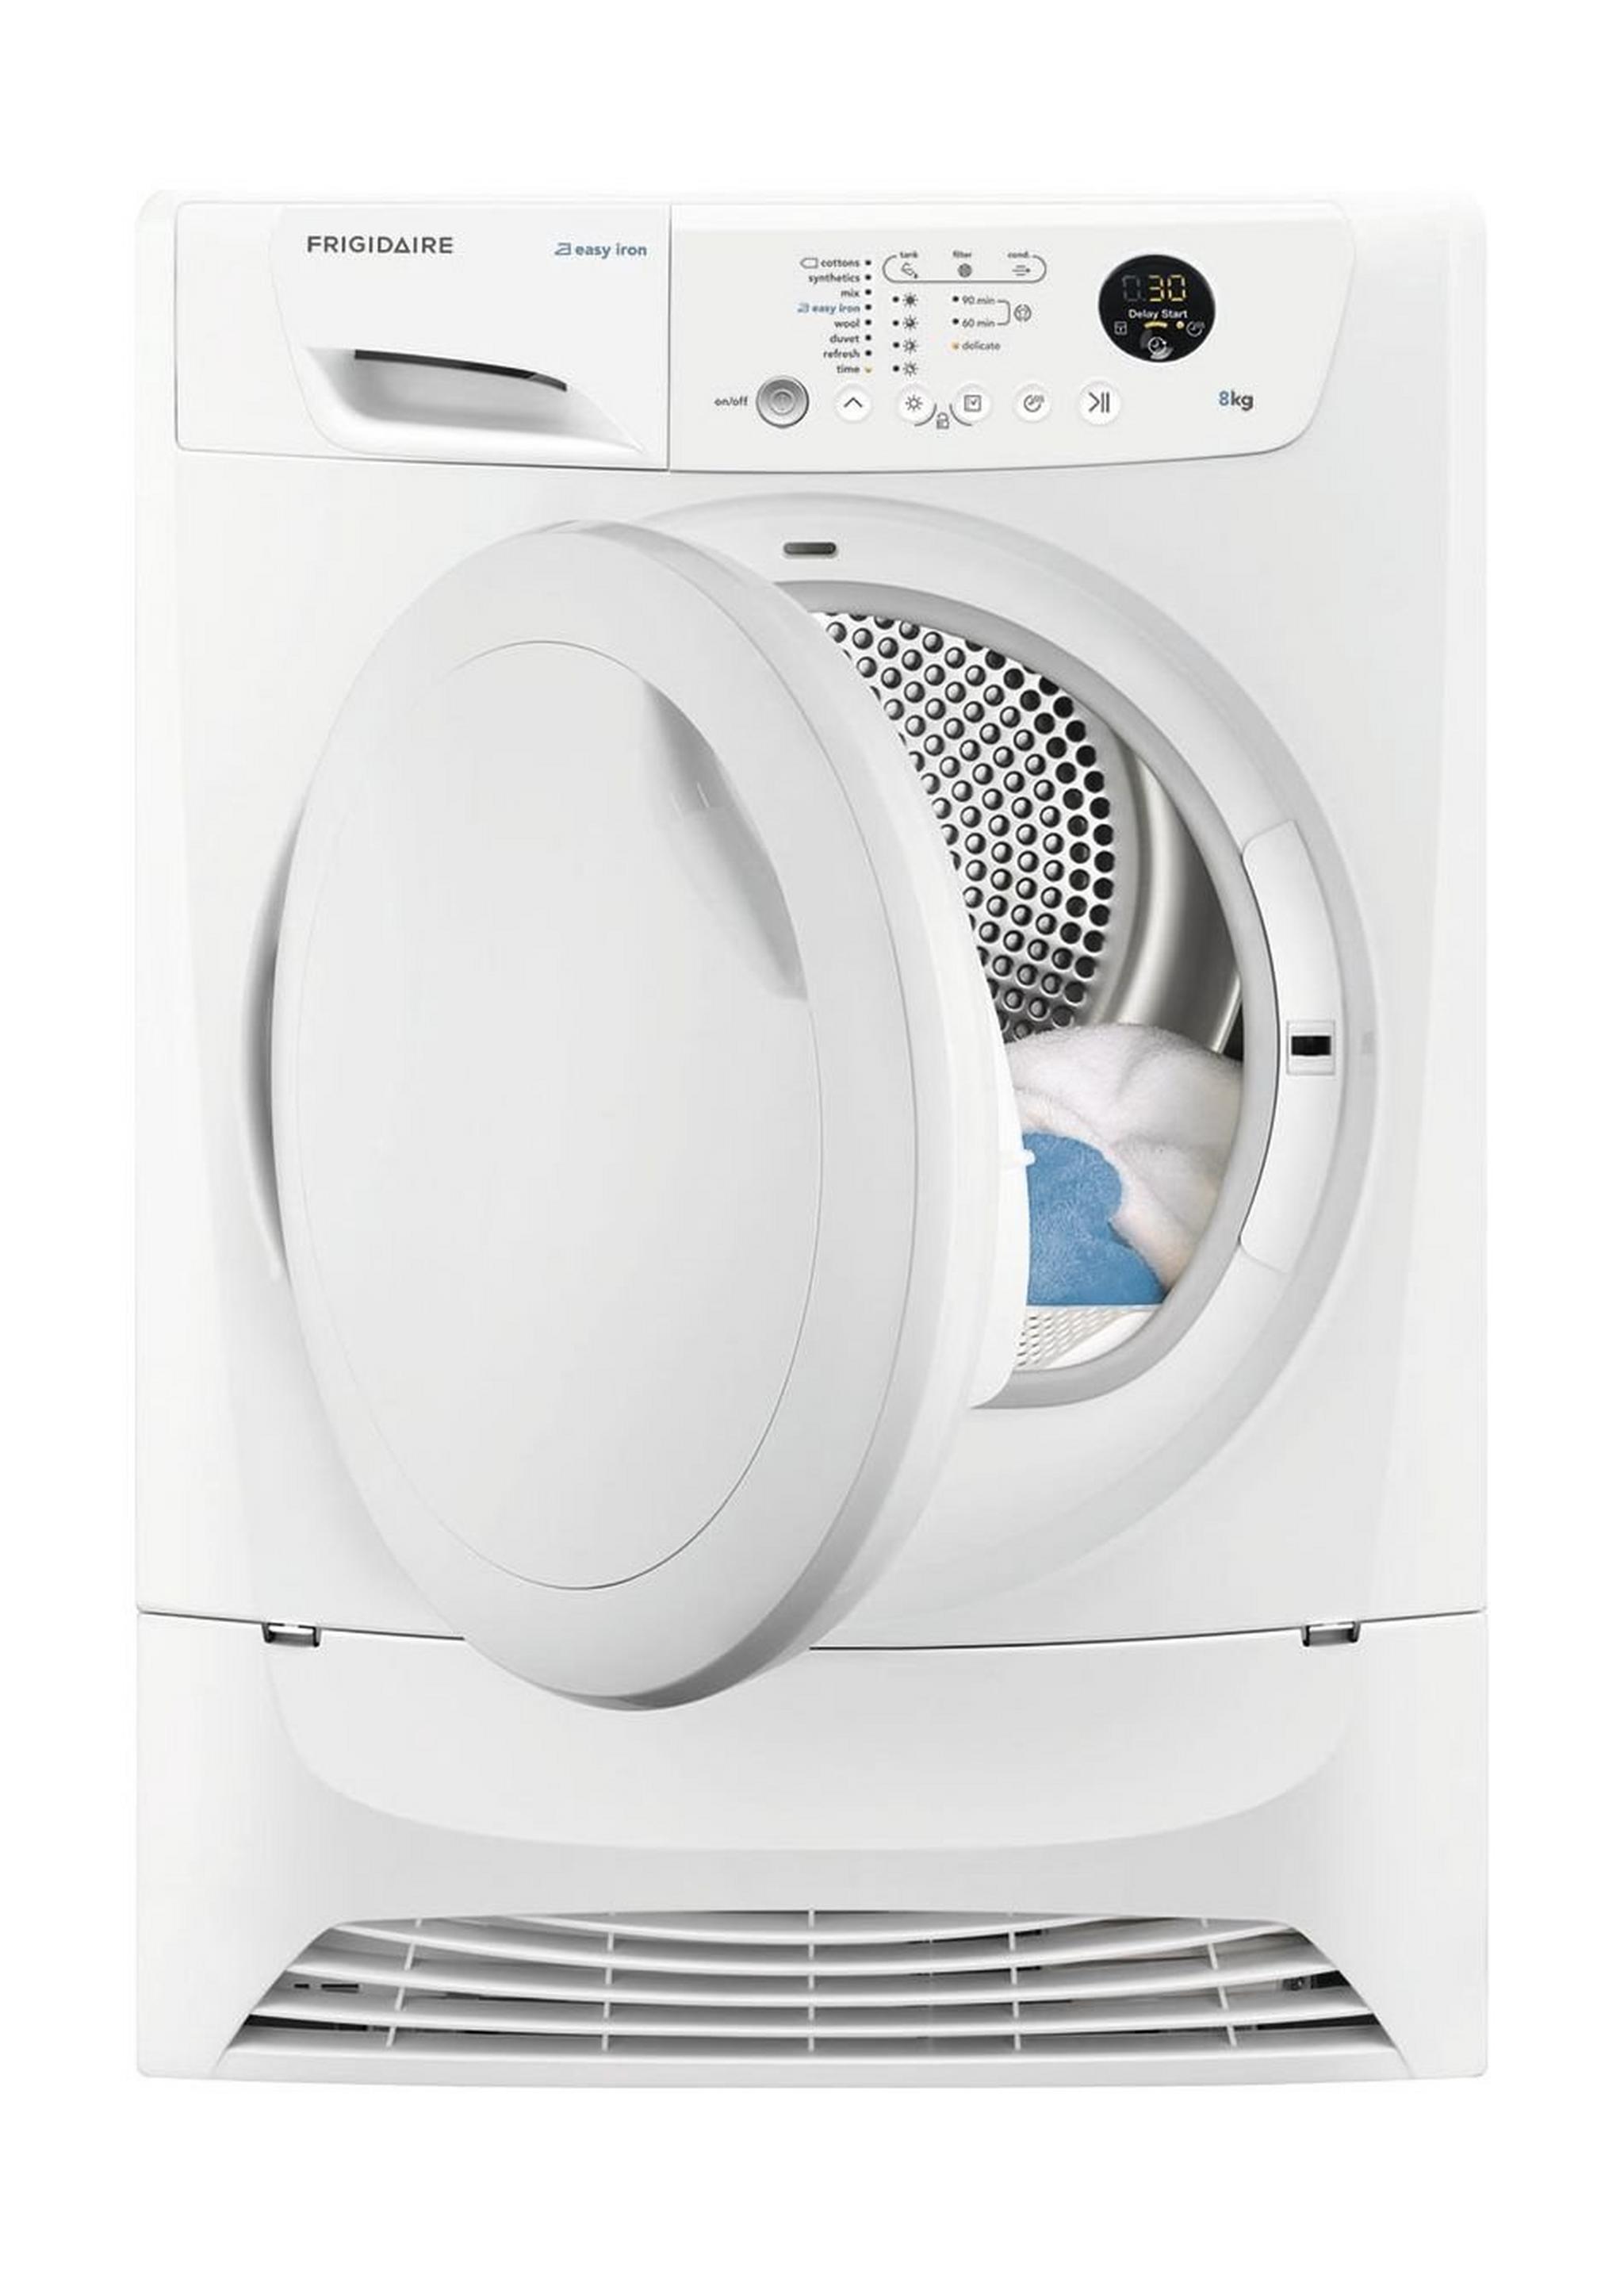 Wansa Washer and Dryer Stacking Unit - Stainless Steel + Frigidaire 8KG Front Loading Freestanding Dryer Condenser (FDC8203P) - White + Frigidaire 8kg Front Load Washing Machine - FWF81663W